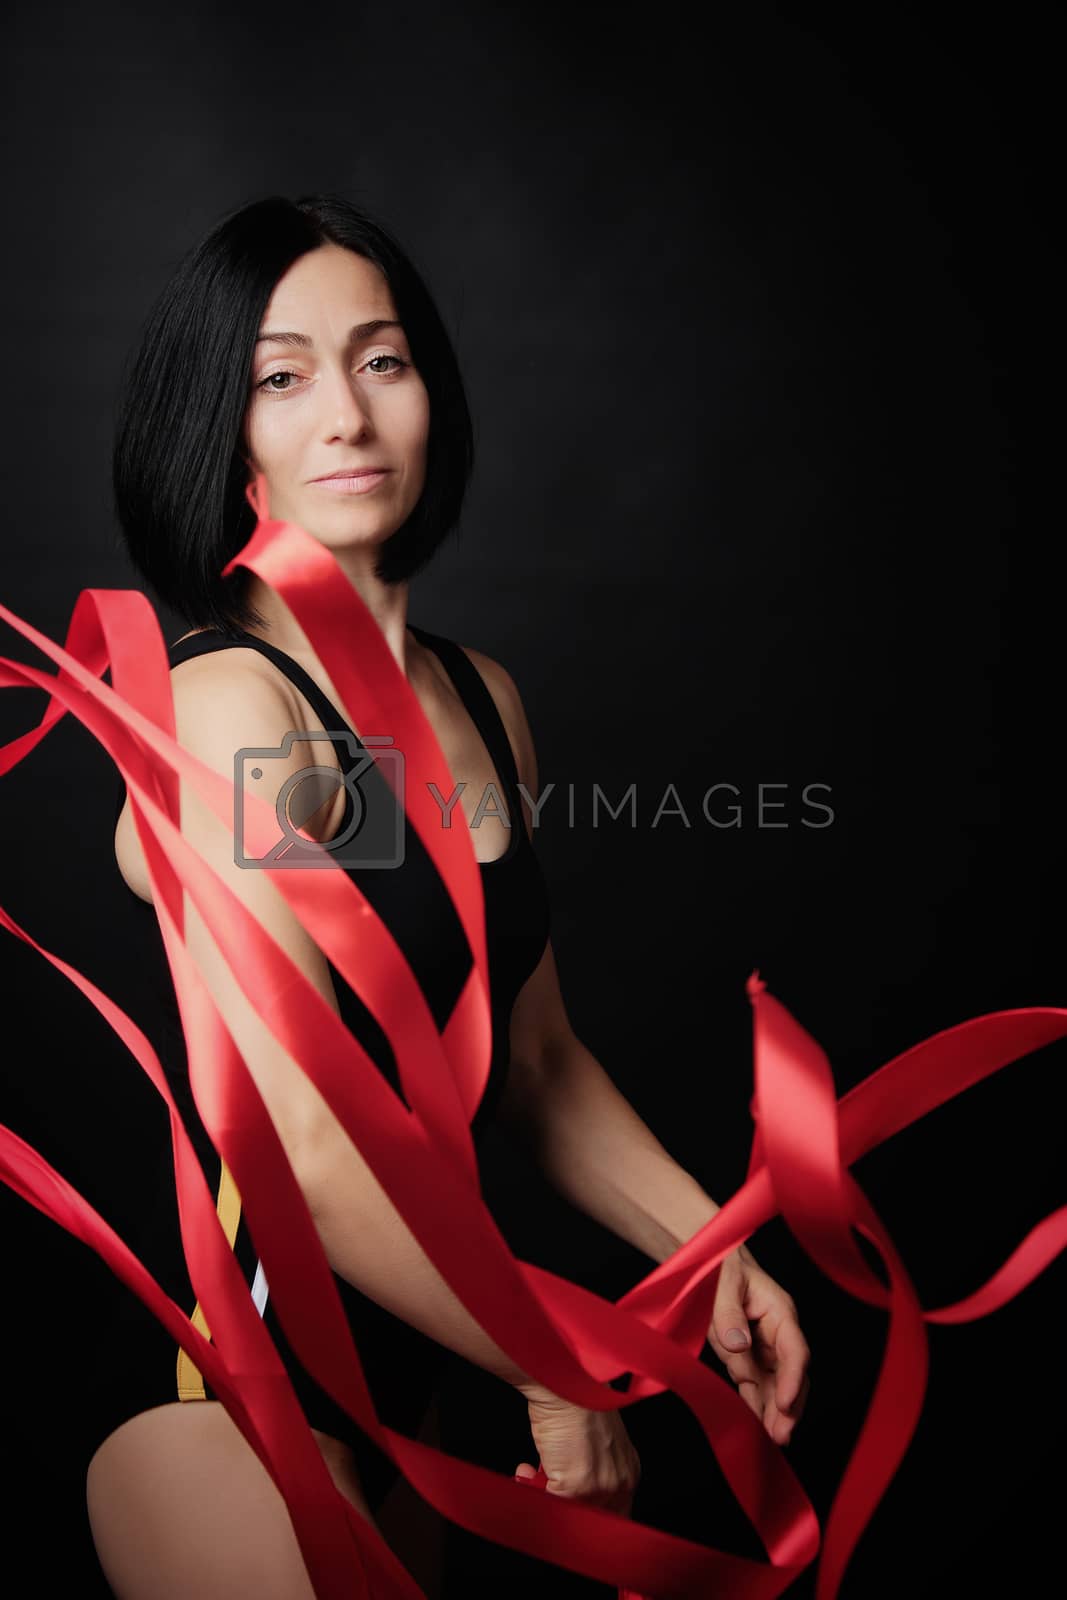 Royalty free image of young woman gymnast of Caucasian appearance with black hair spin by ndanko